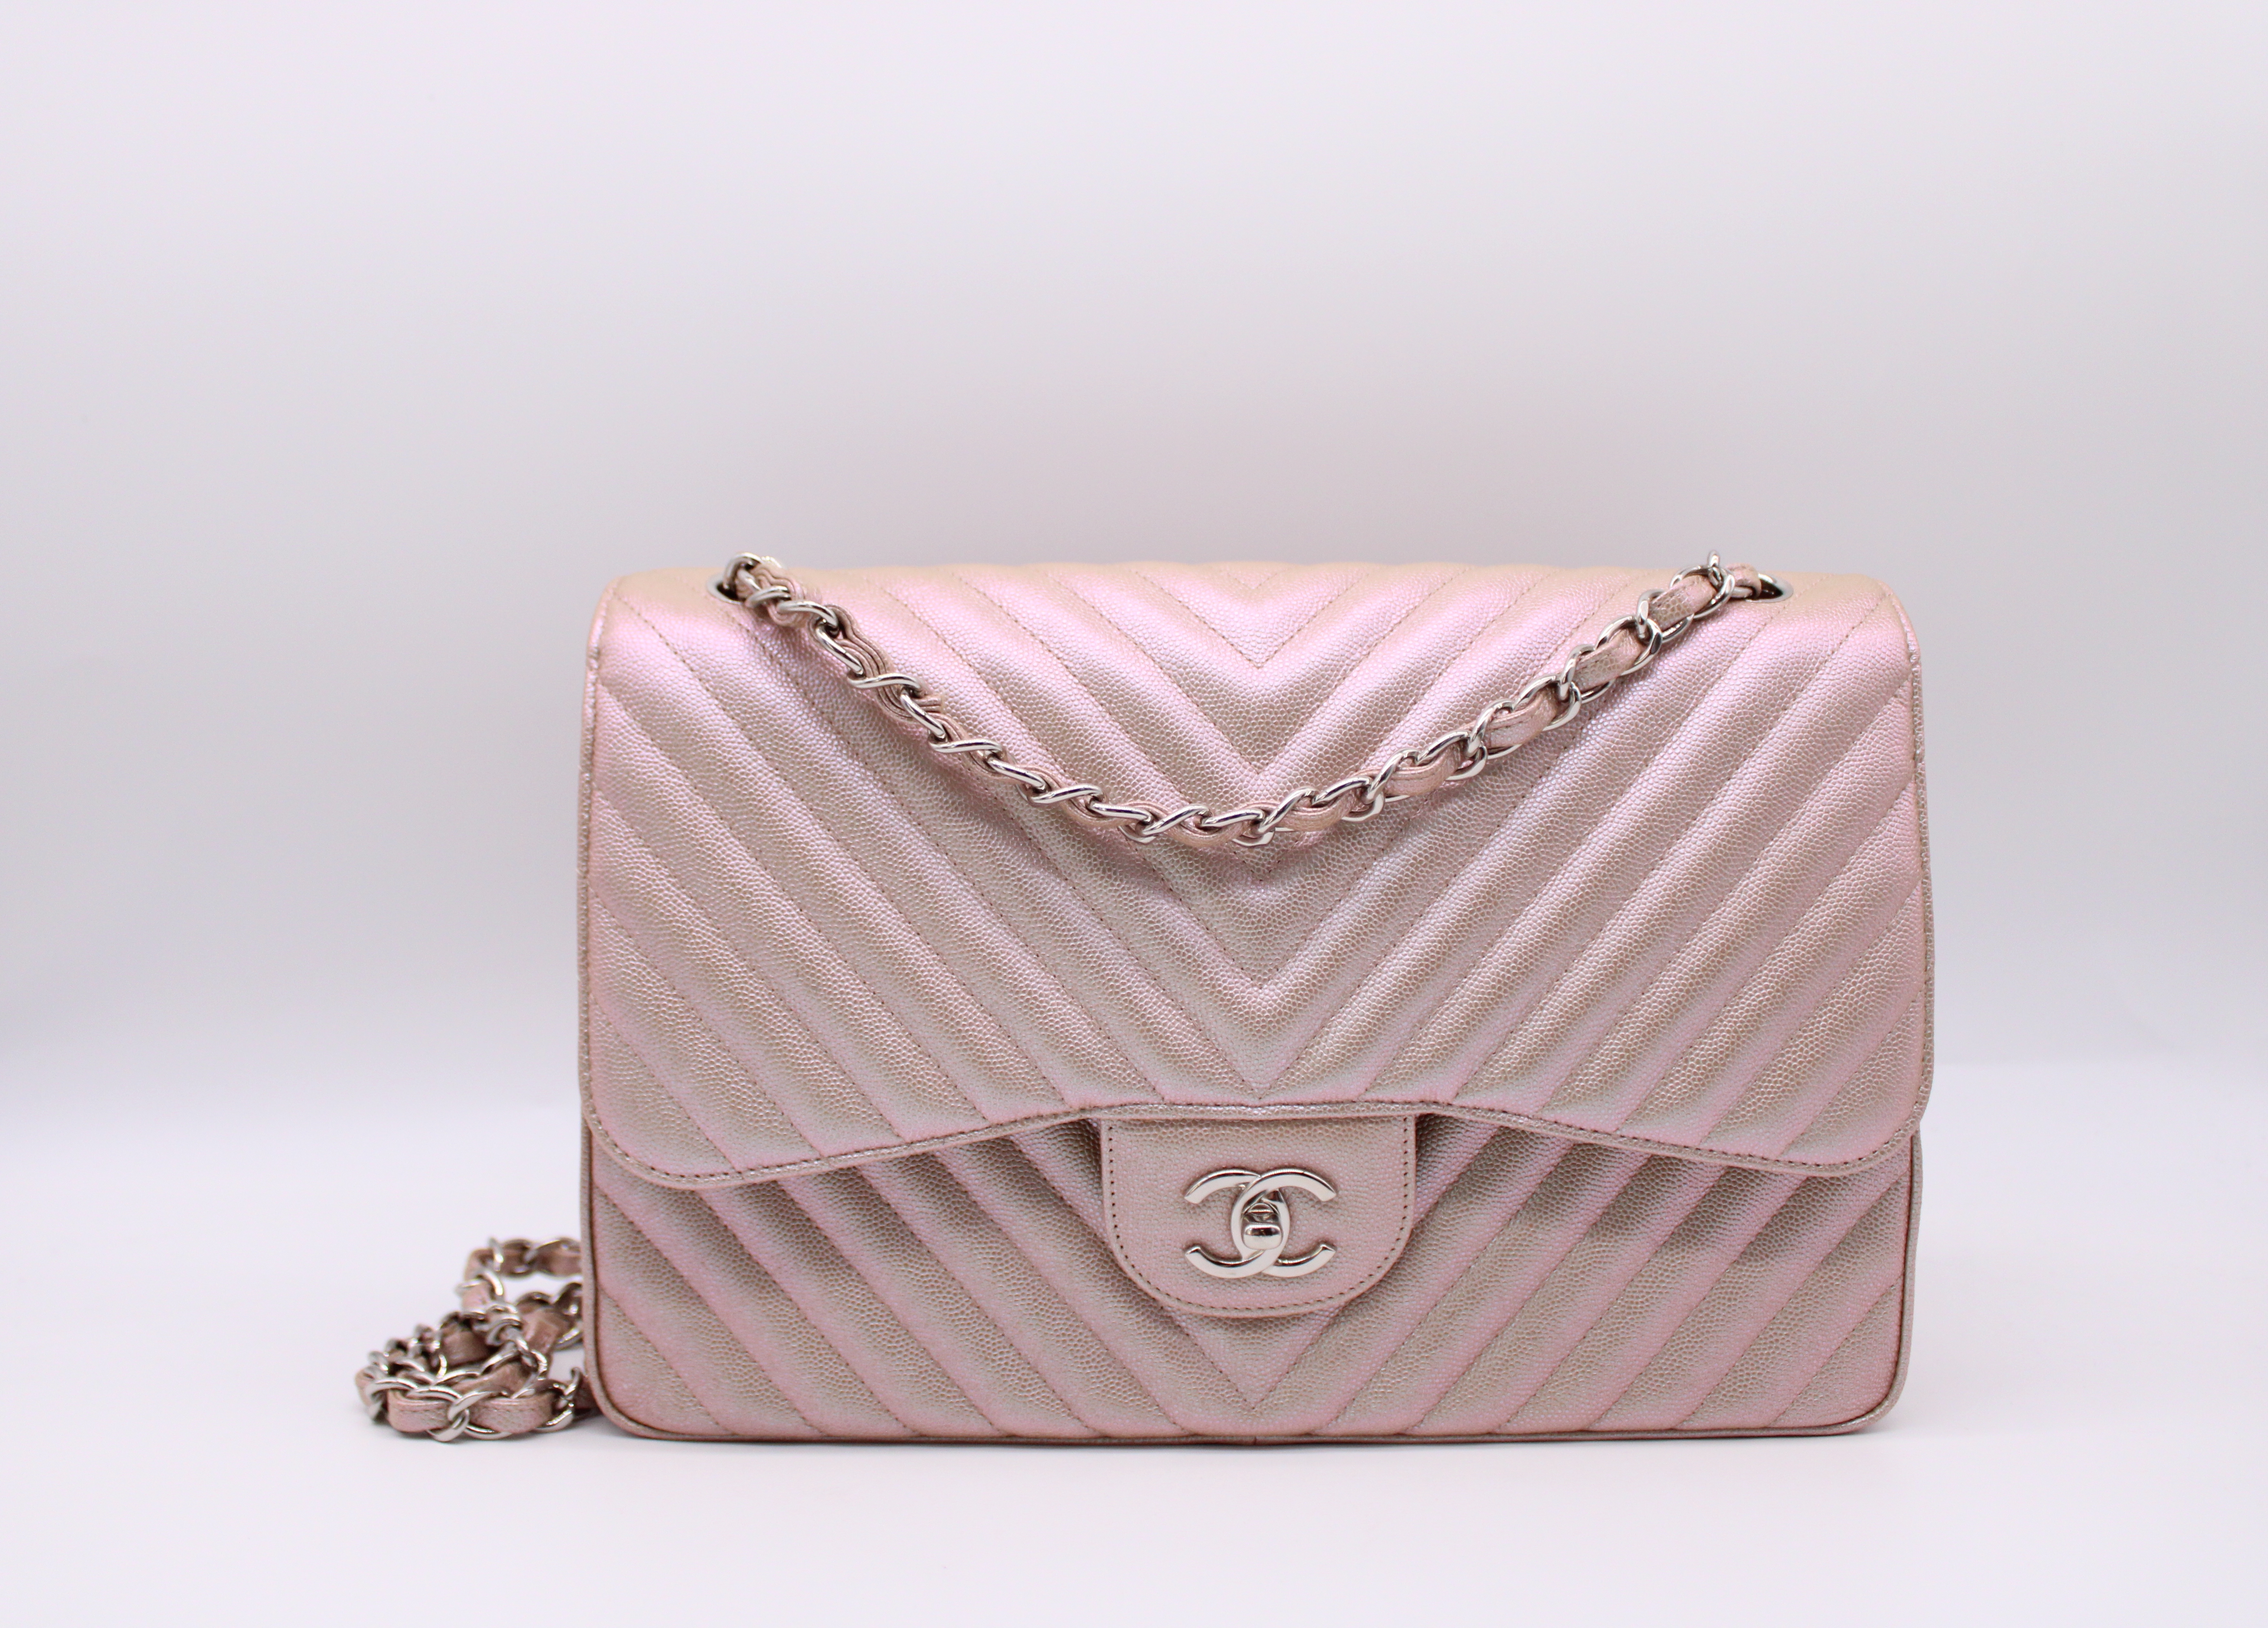 chanel bag with rose gold hardware